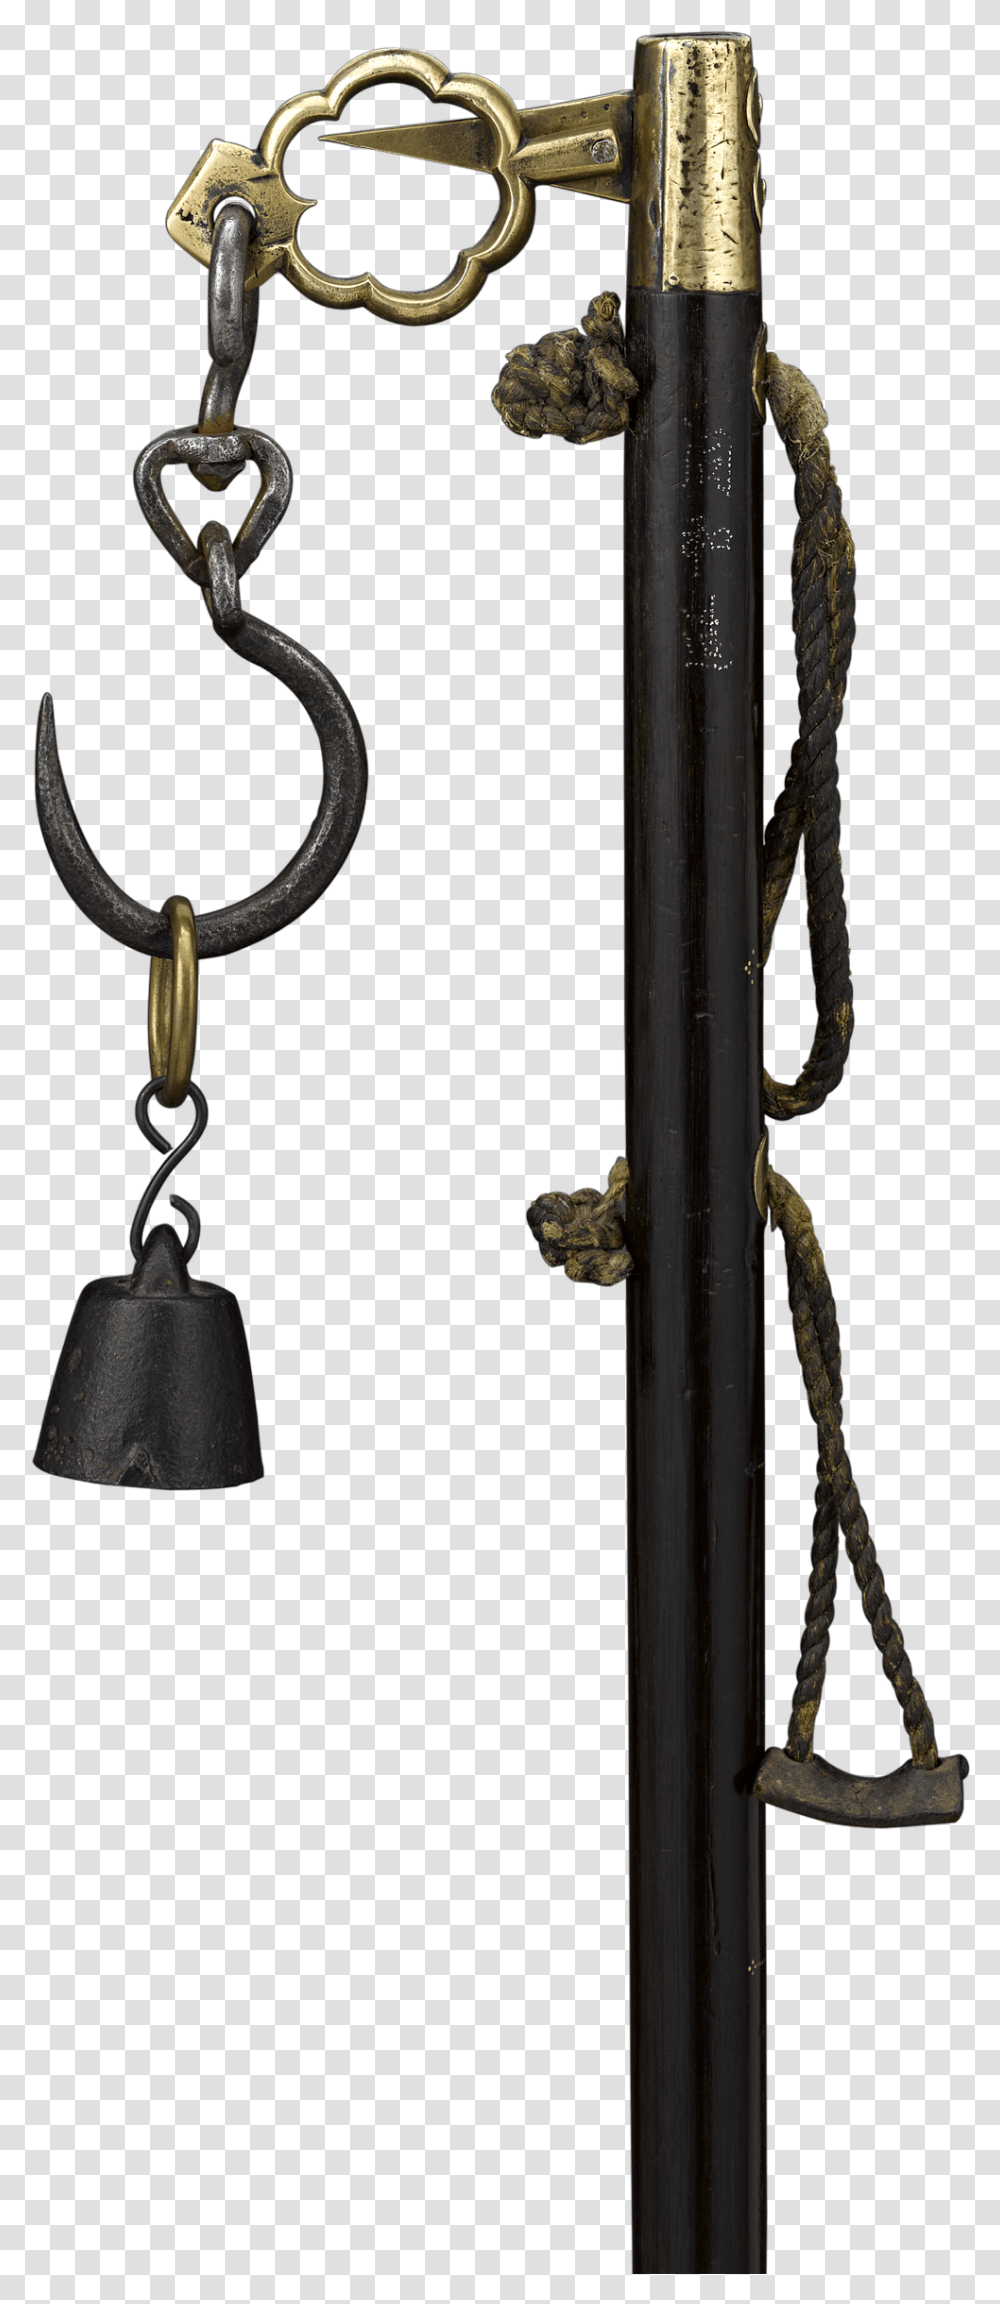 Chinese Steelyard Balance Scale Cane Chain, Cowbell, Chime, Musical Instrument, Windchime Transparent Png